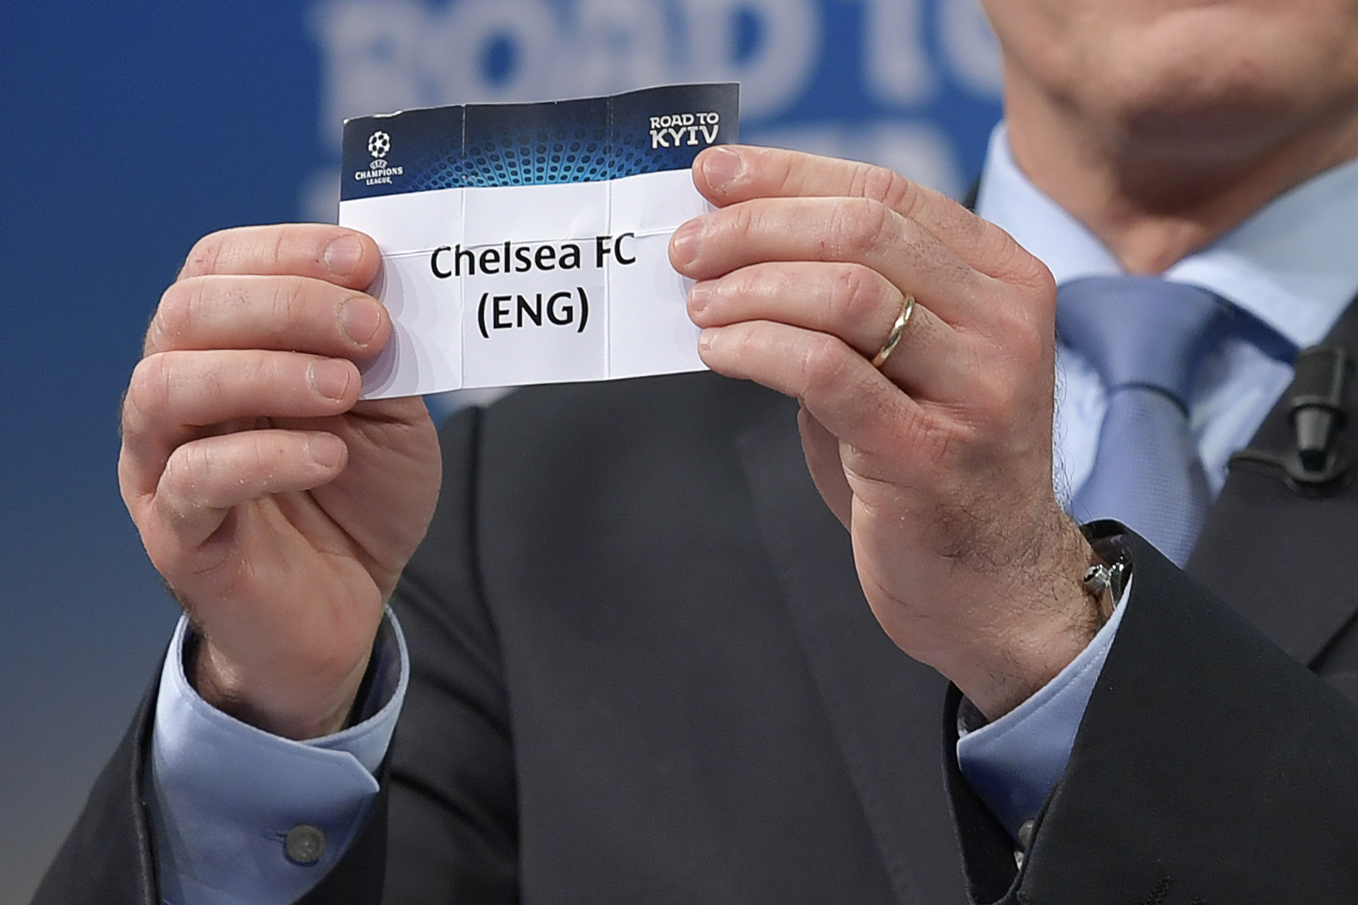 Chelsea will face one out of these seven teams in the UEFA Champions League round of 16 in February 2021. (GETTY Images)